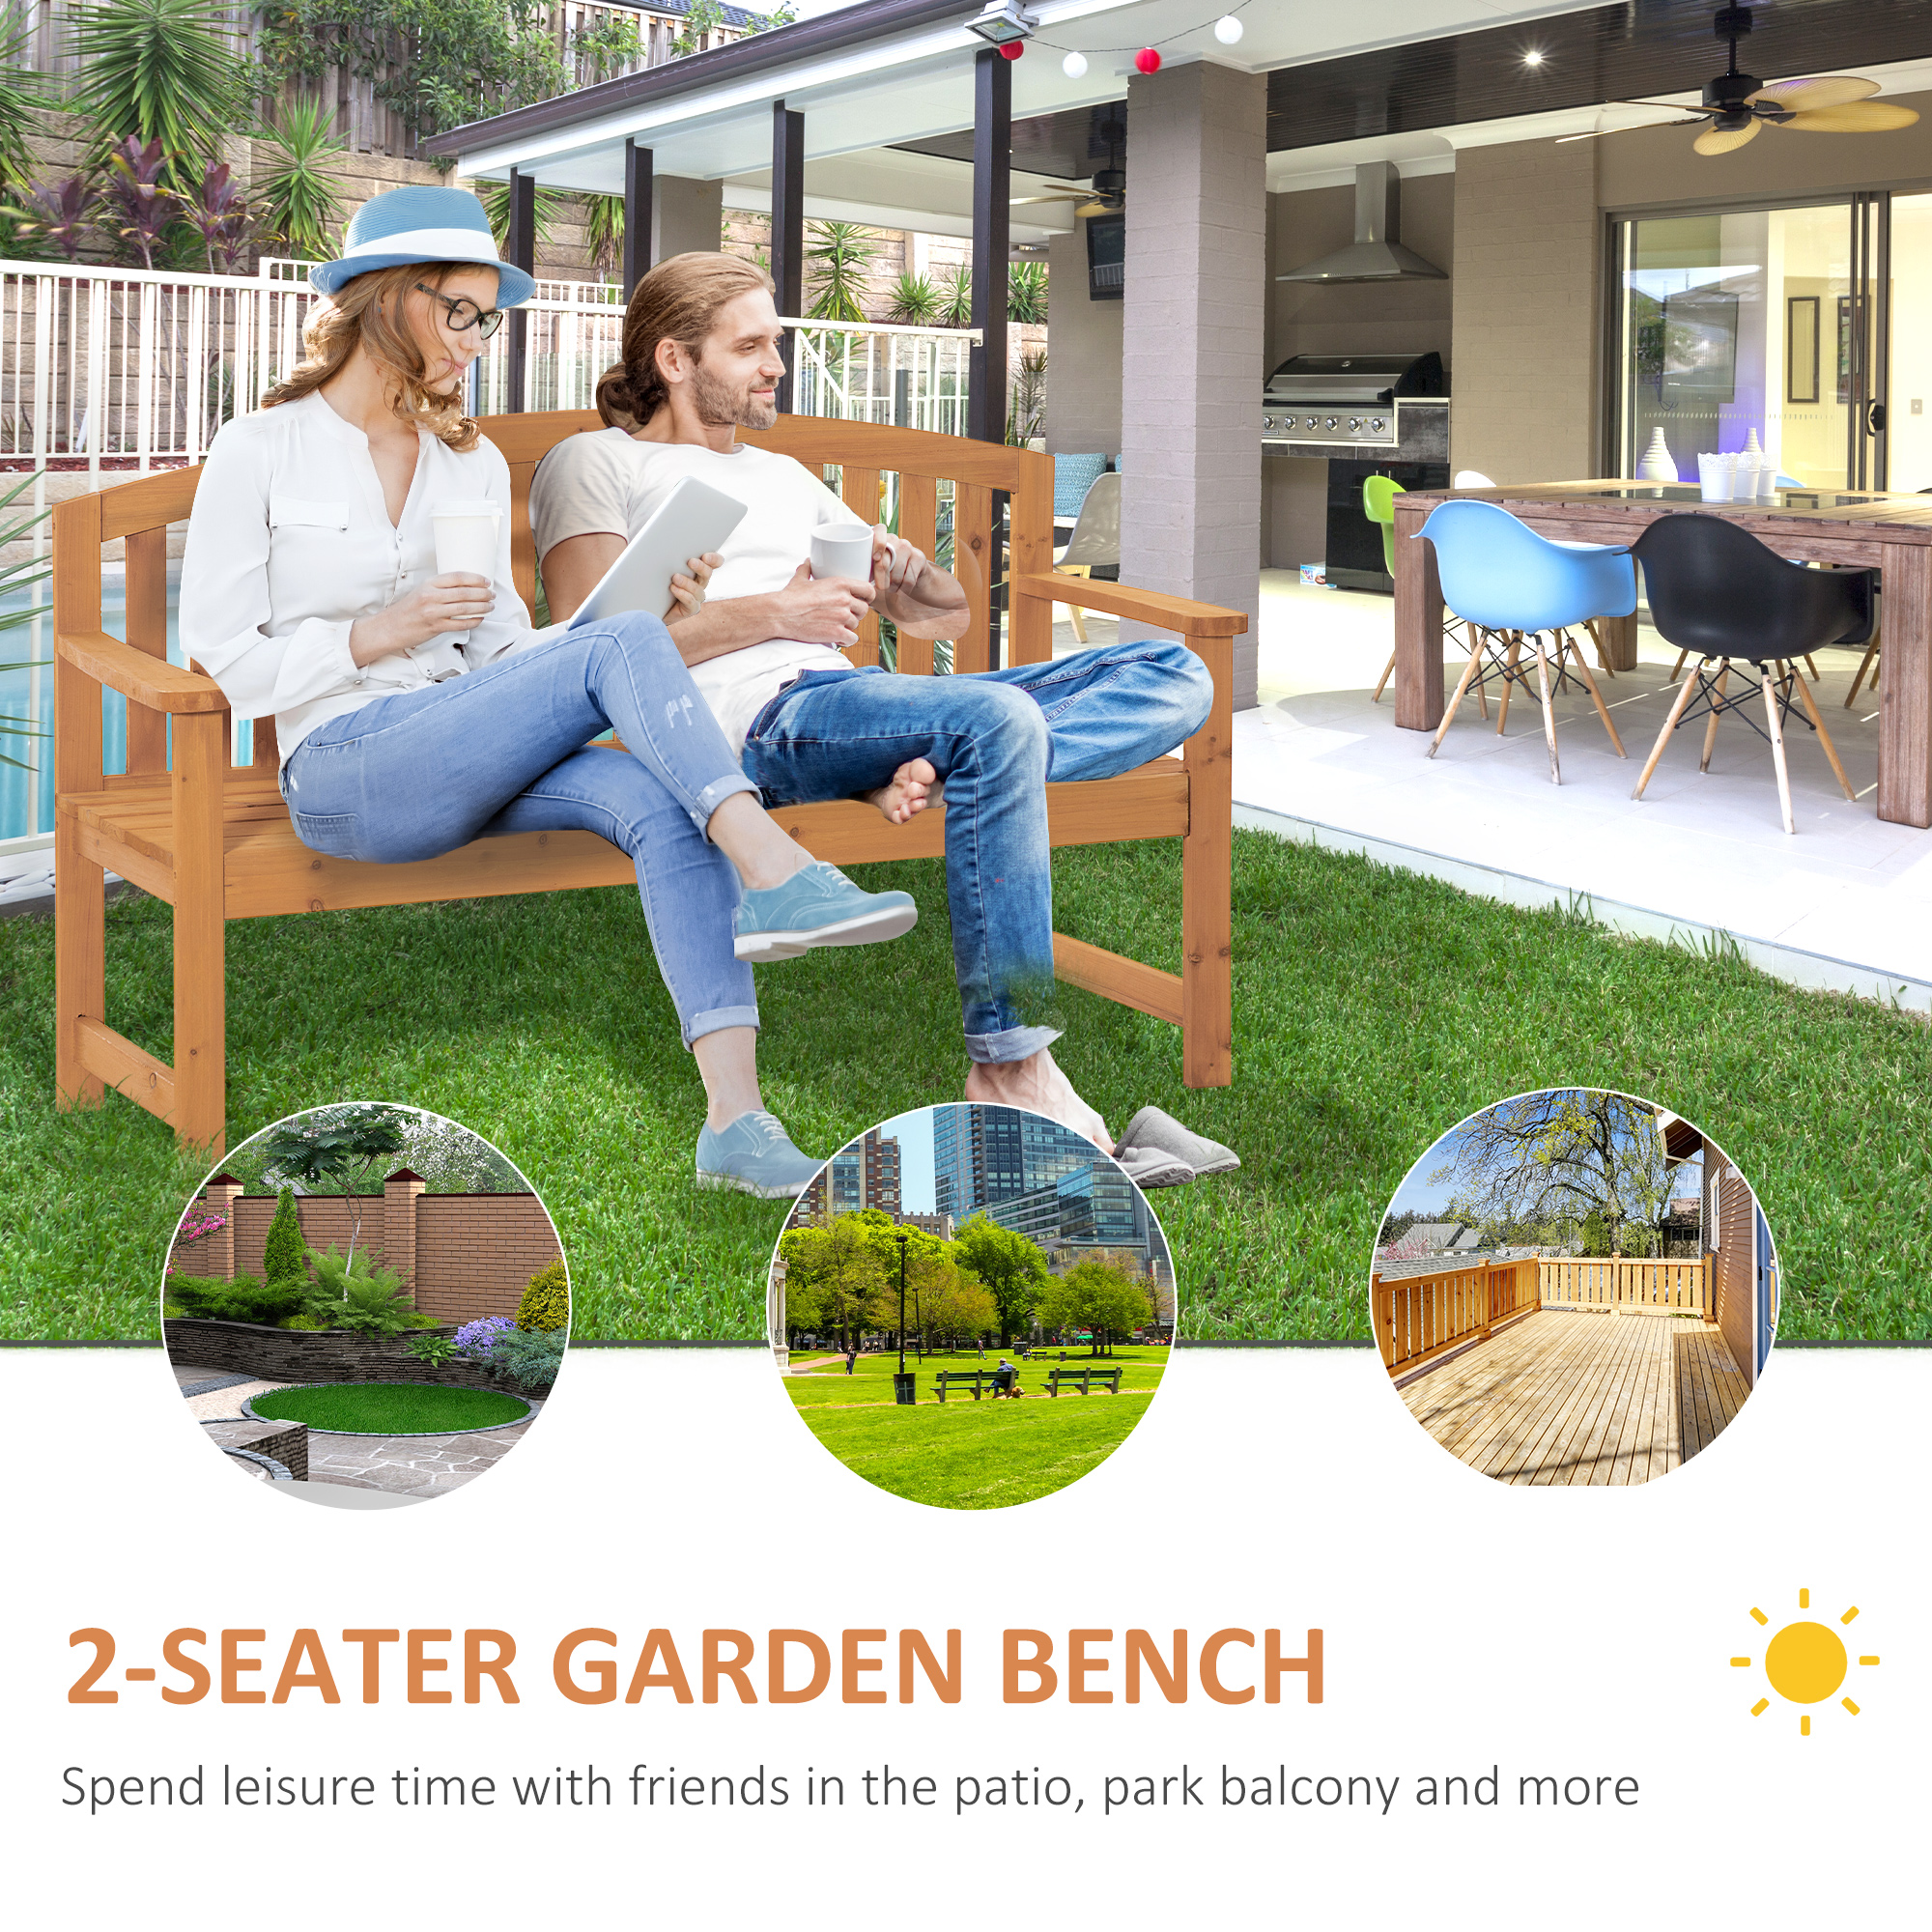 Outsunny 4.6' Wooden Garden Bench, 3 Seater Outdoor Patio Seat with ...